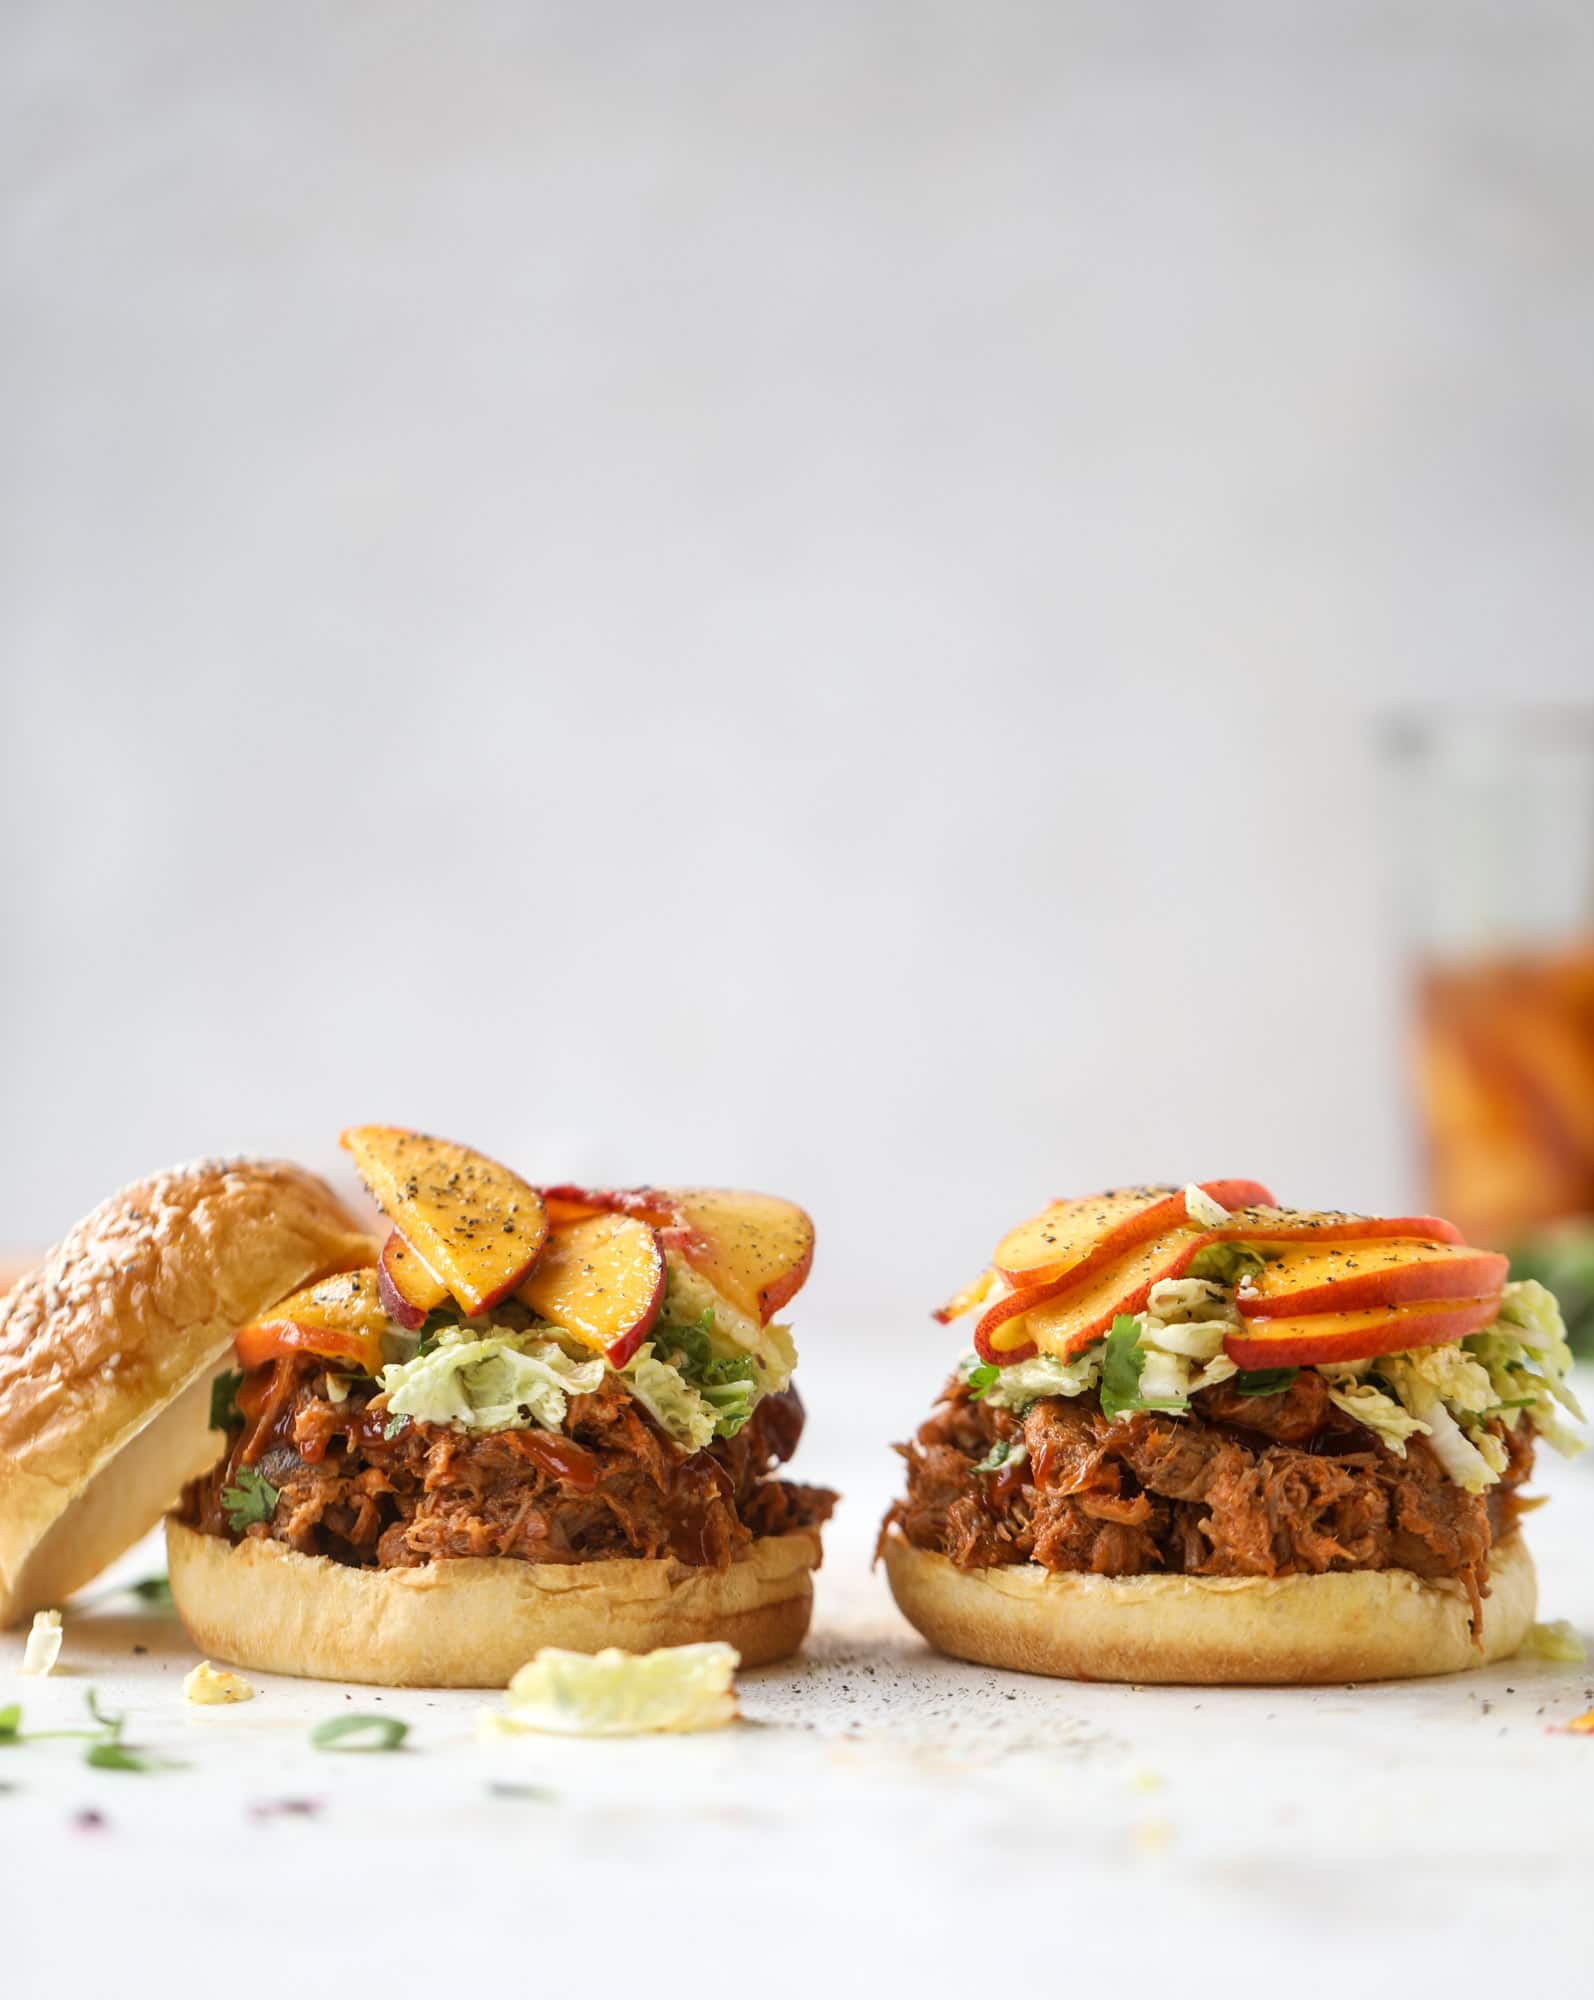 This chipotle pulled pork sandwich is spicy, sweet and saucy. Throw it on a bun or a plate and top it with the most delicious quick pickled peaches and napa cabbage slaw. Flavor and texture make this sandwich incredible! I howsweeteats.com #pulled #pork #chipotle #pickled #peaches #slaw #sandwiches #slow #cooker